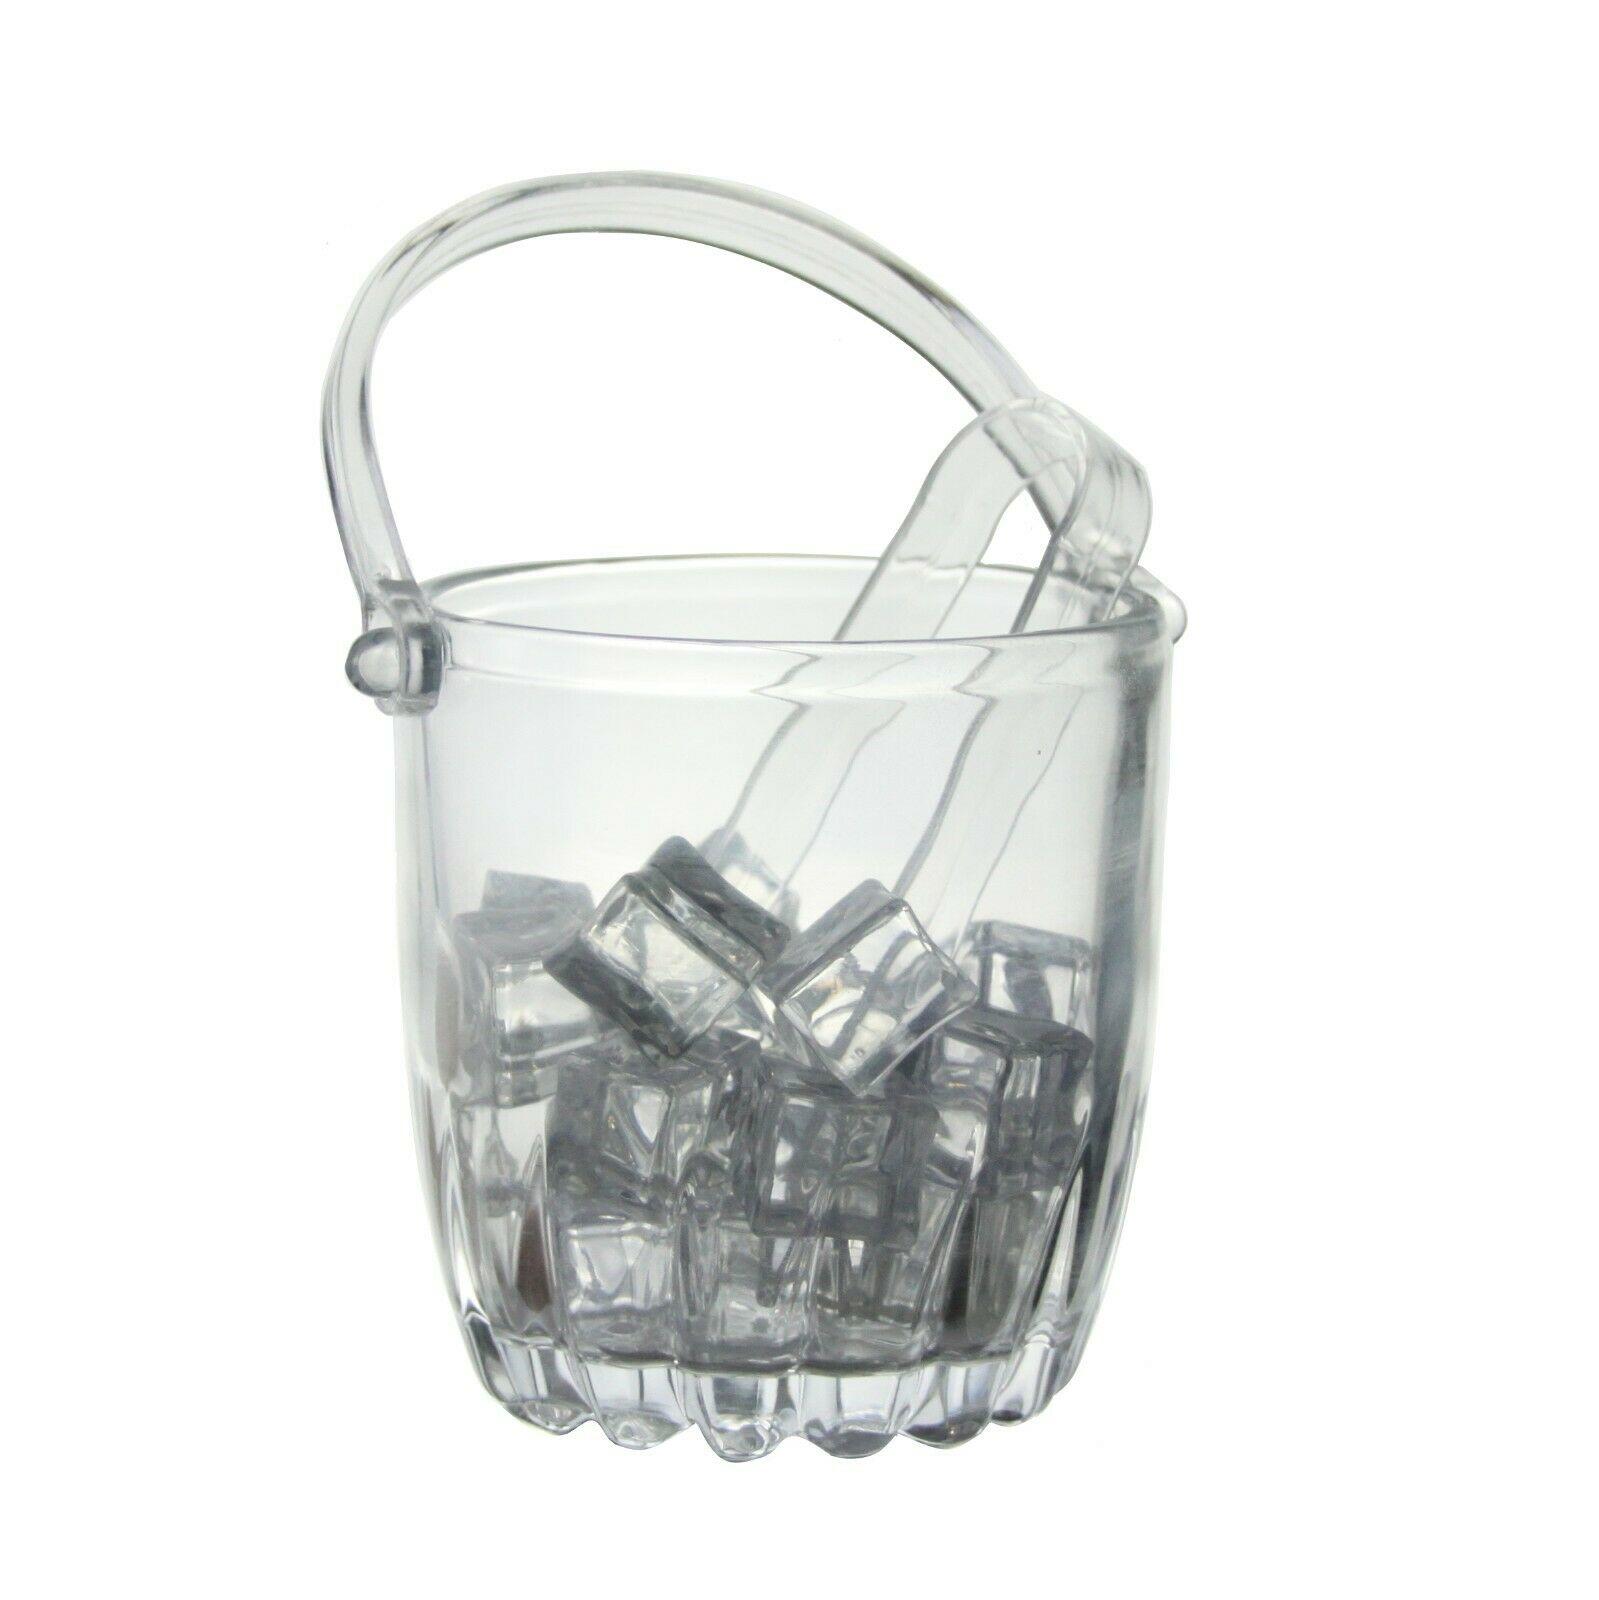 Whiskey Cocktails Sozali Glass Ice Bucket With Tongs Clear Transparent Mini Ice Cube Serving Holder Cooler Bucket And Carry Handle For Parties Drinks 